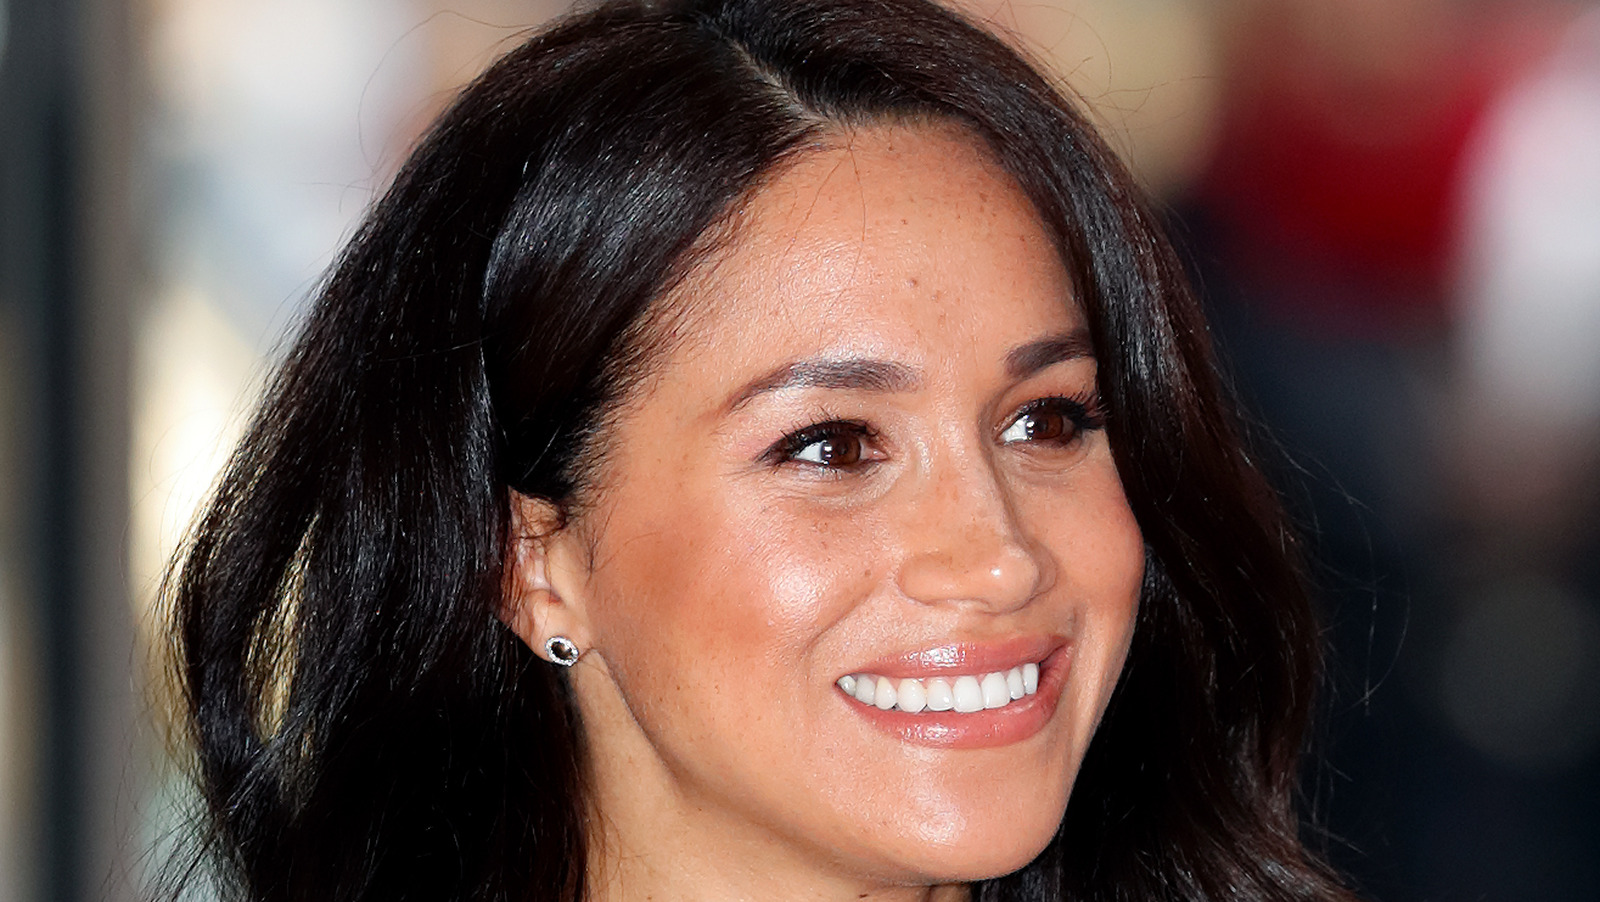 Here's What Meghan Markle Typically Eats In A Day